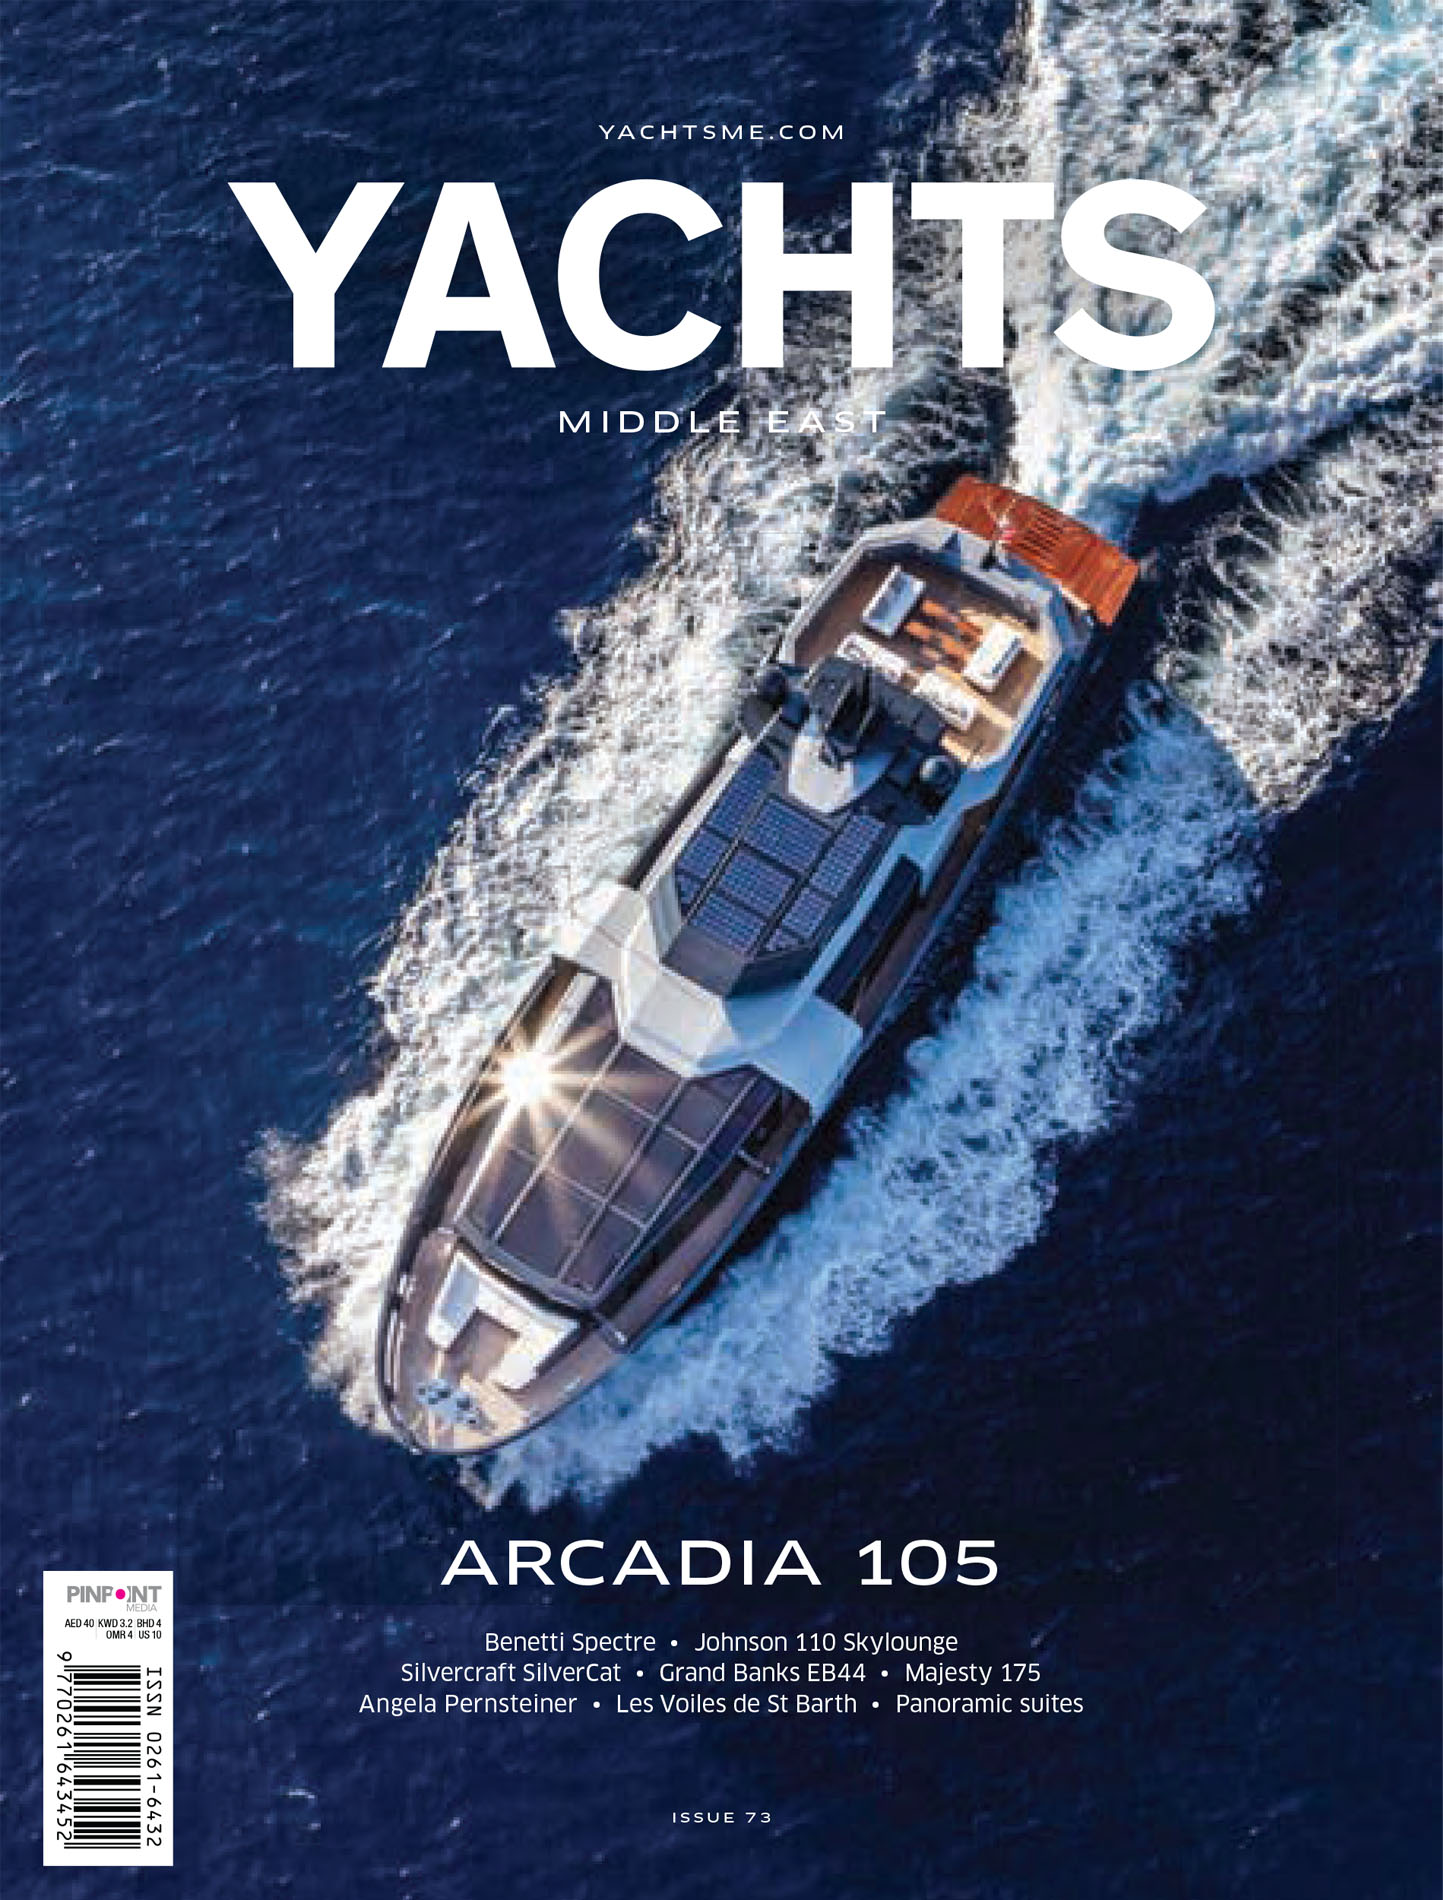 Yachts Middle East, September 2019